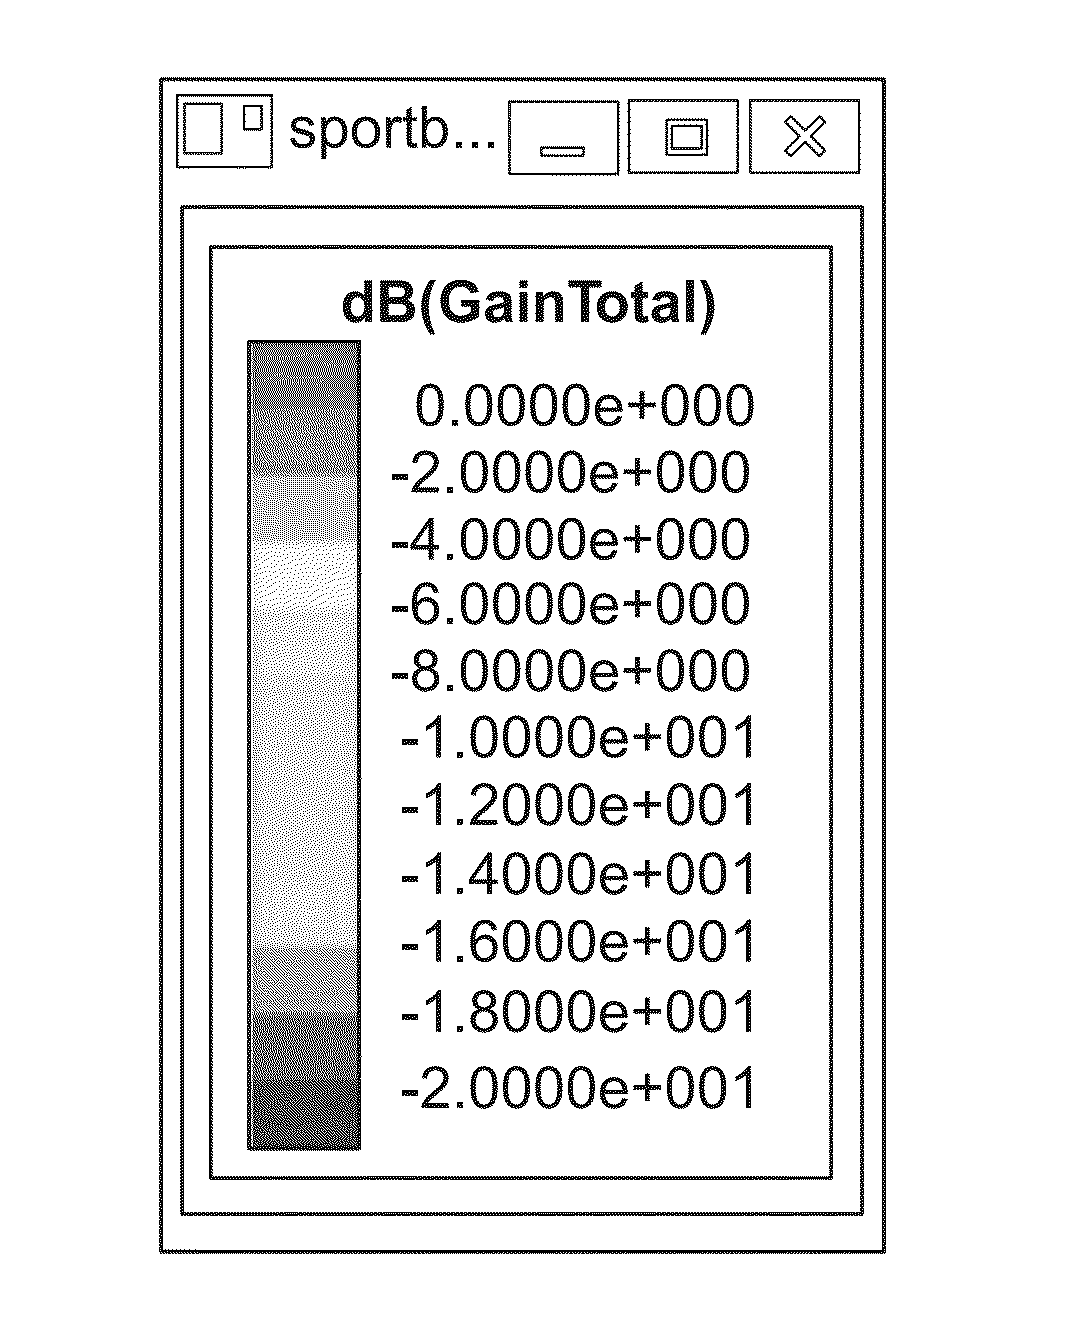 Wearable device assembly having antenna